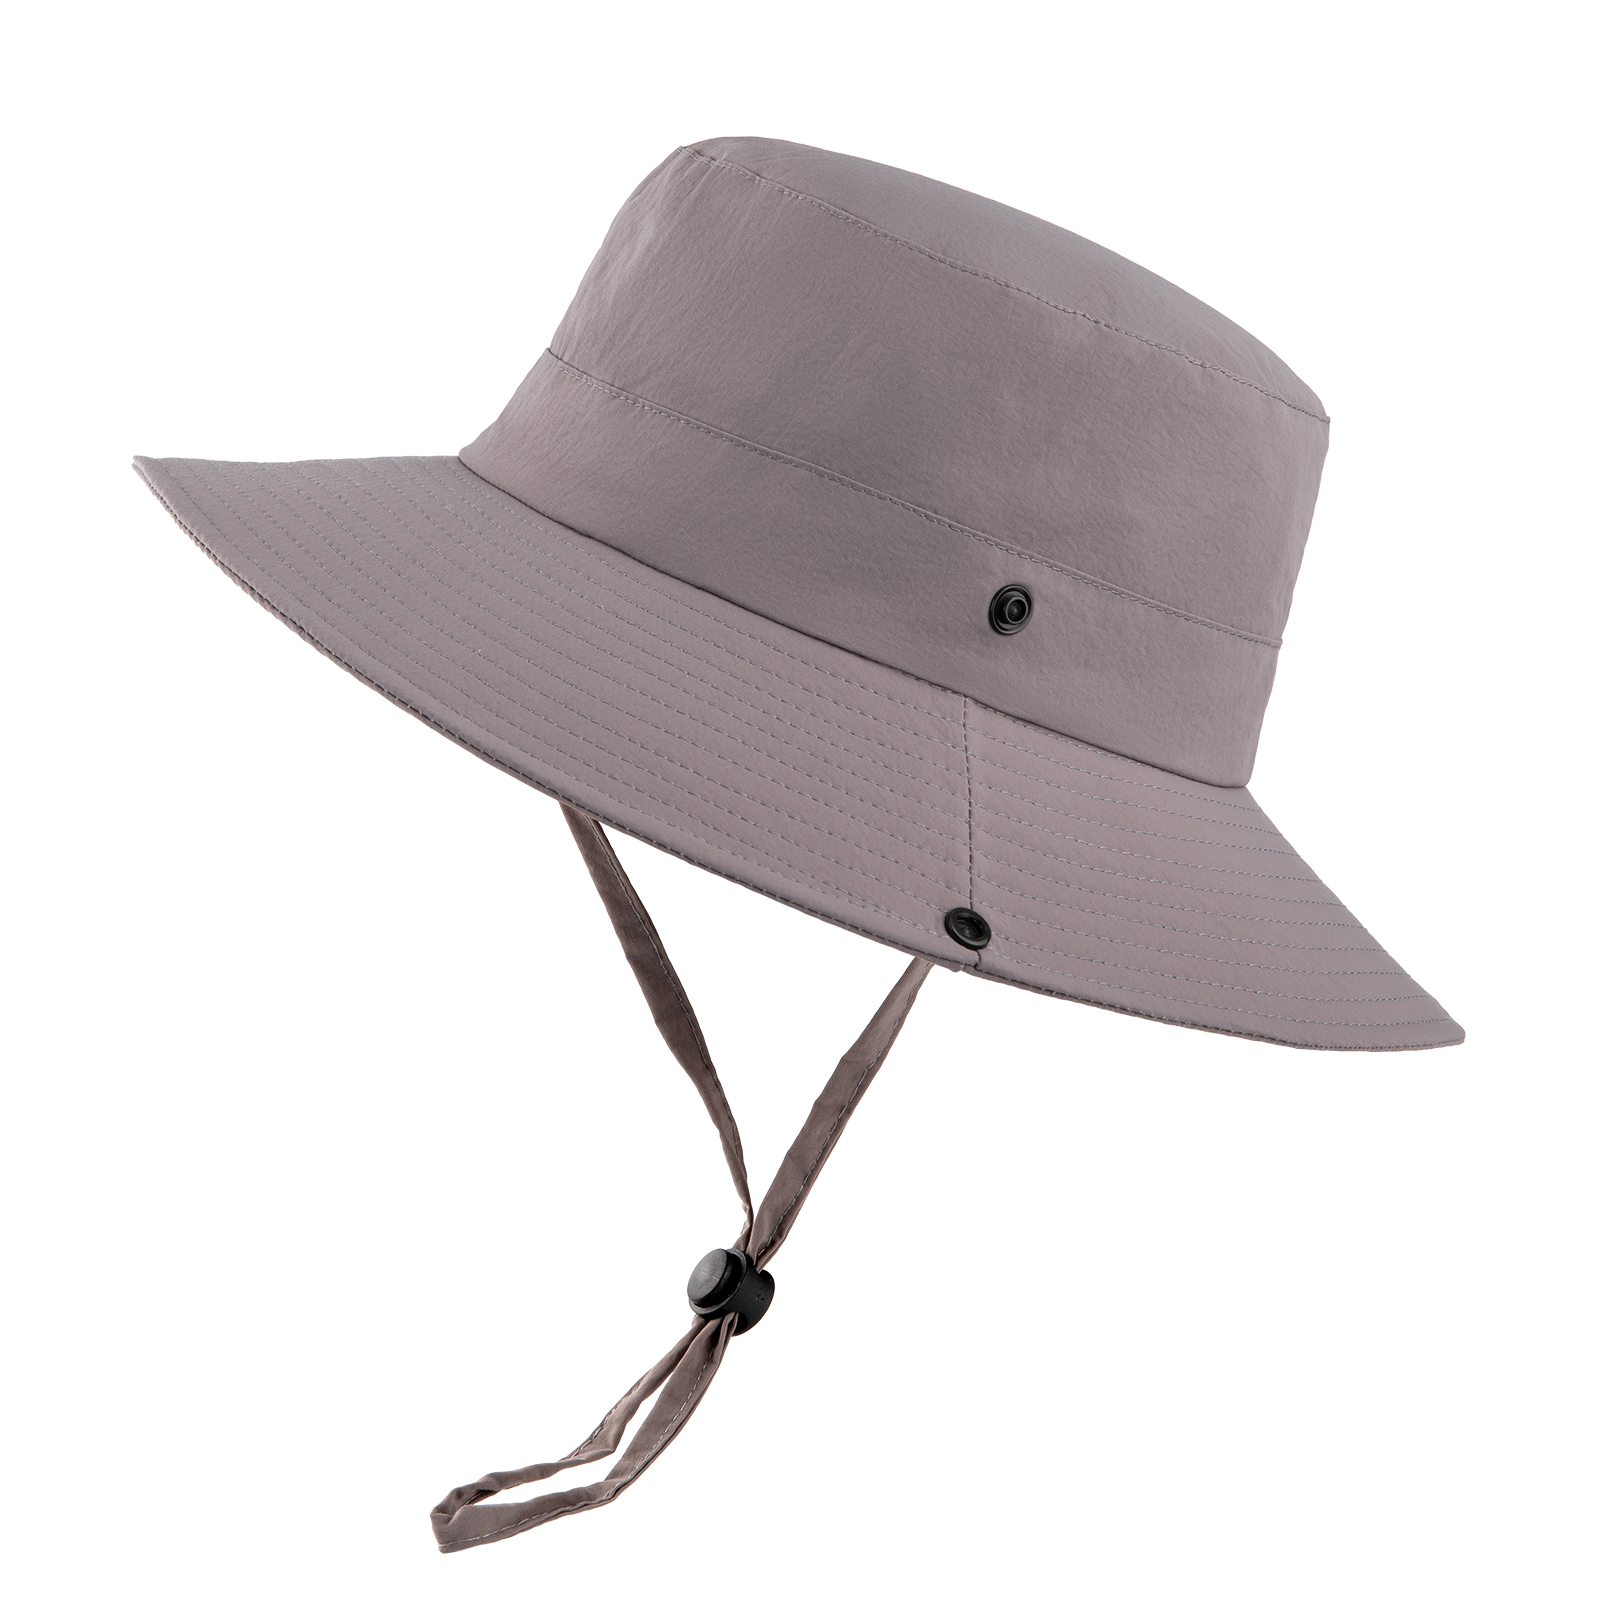 COOPLUS Sun Hats for Men Women Fishing Hat Breathable Wide Brim Summer UV Protection Hat - image 2 of 5